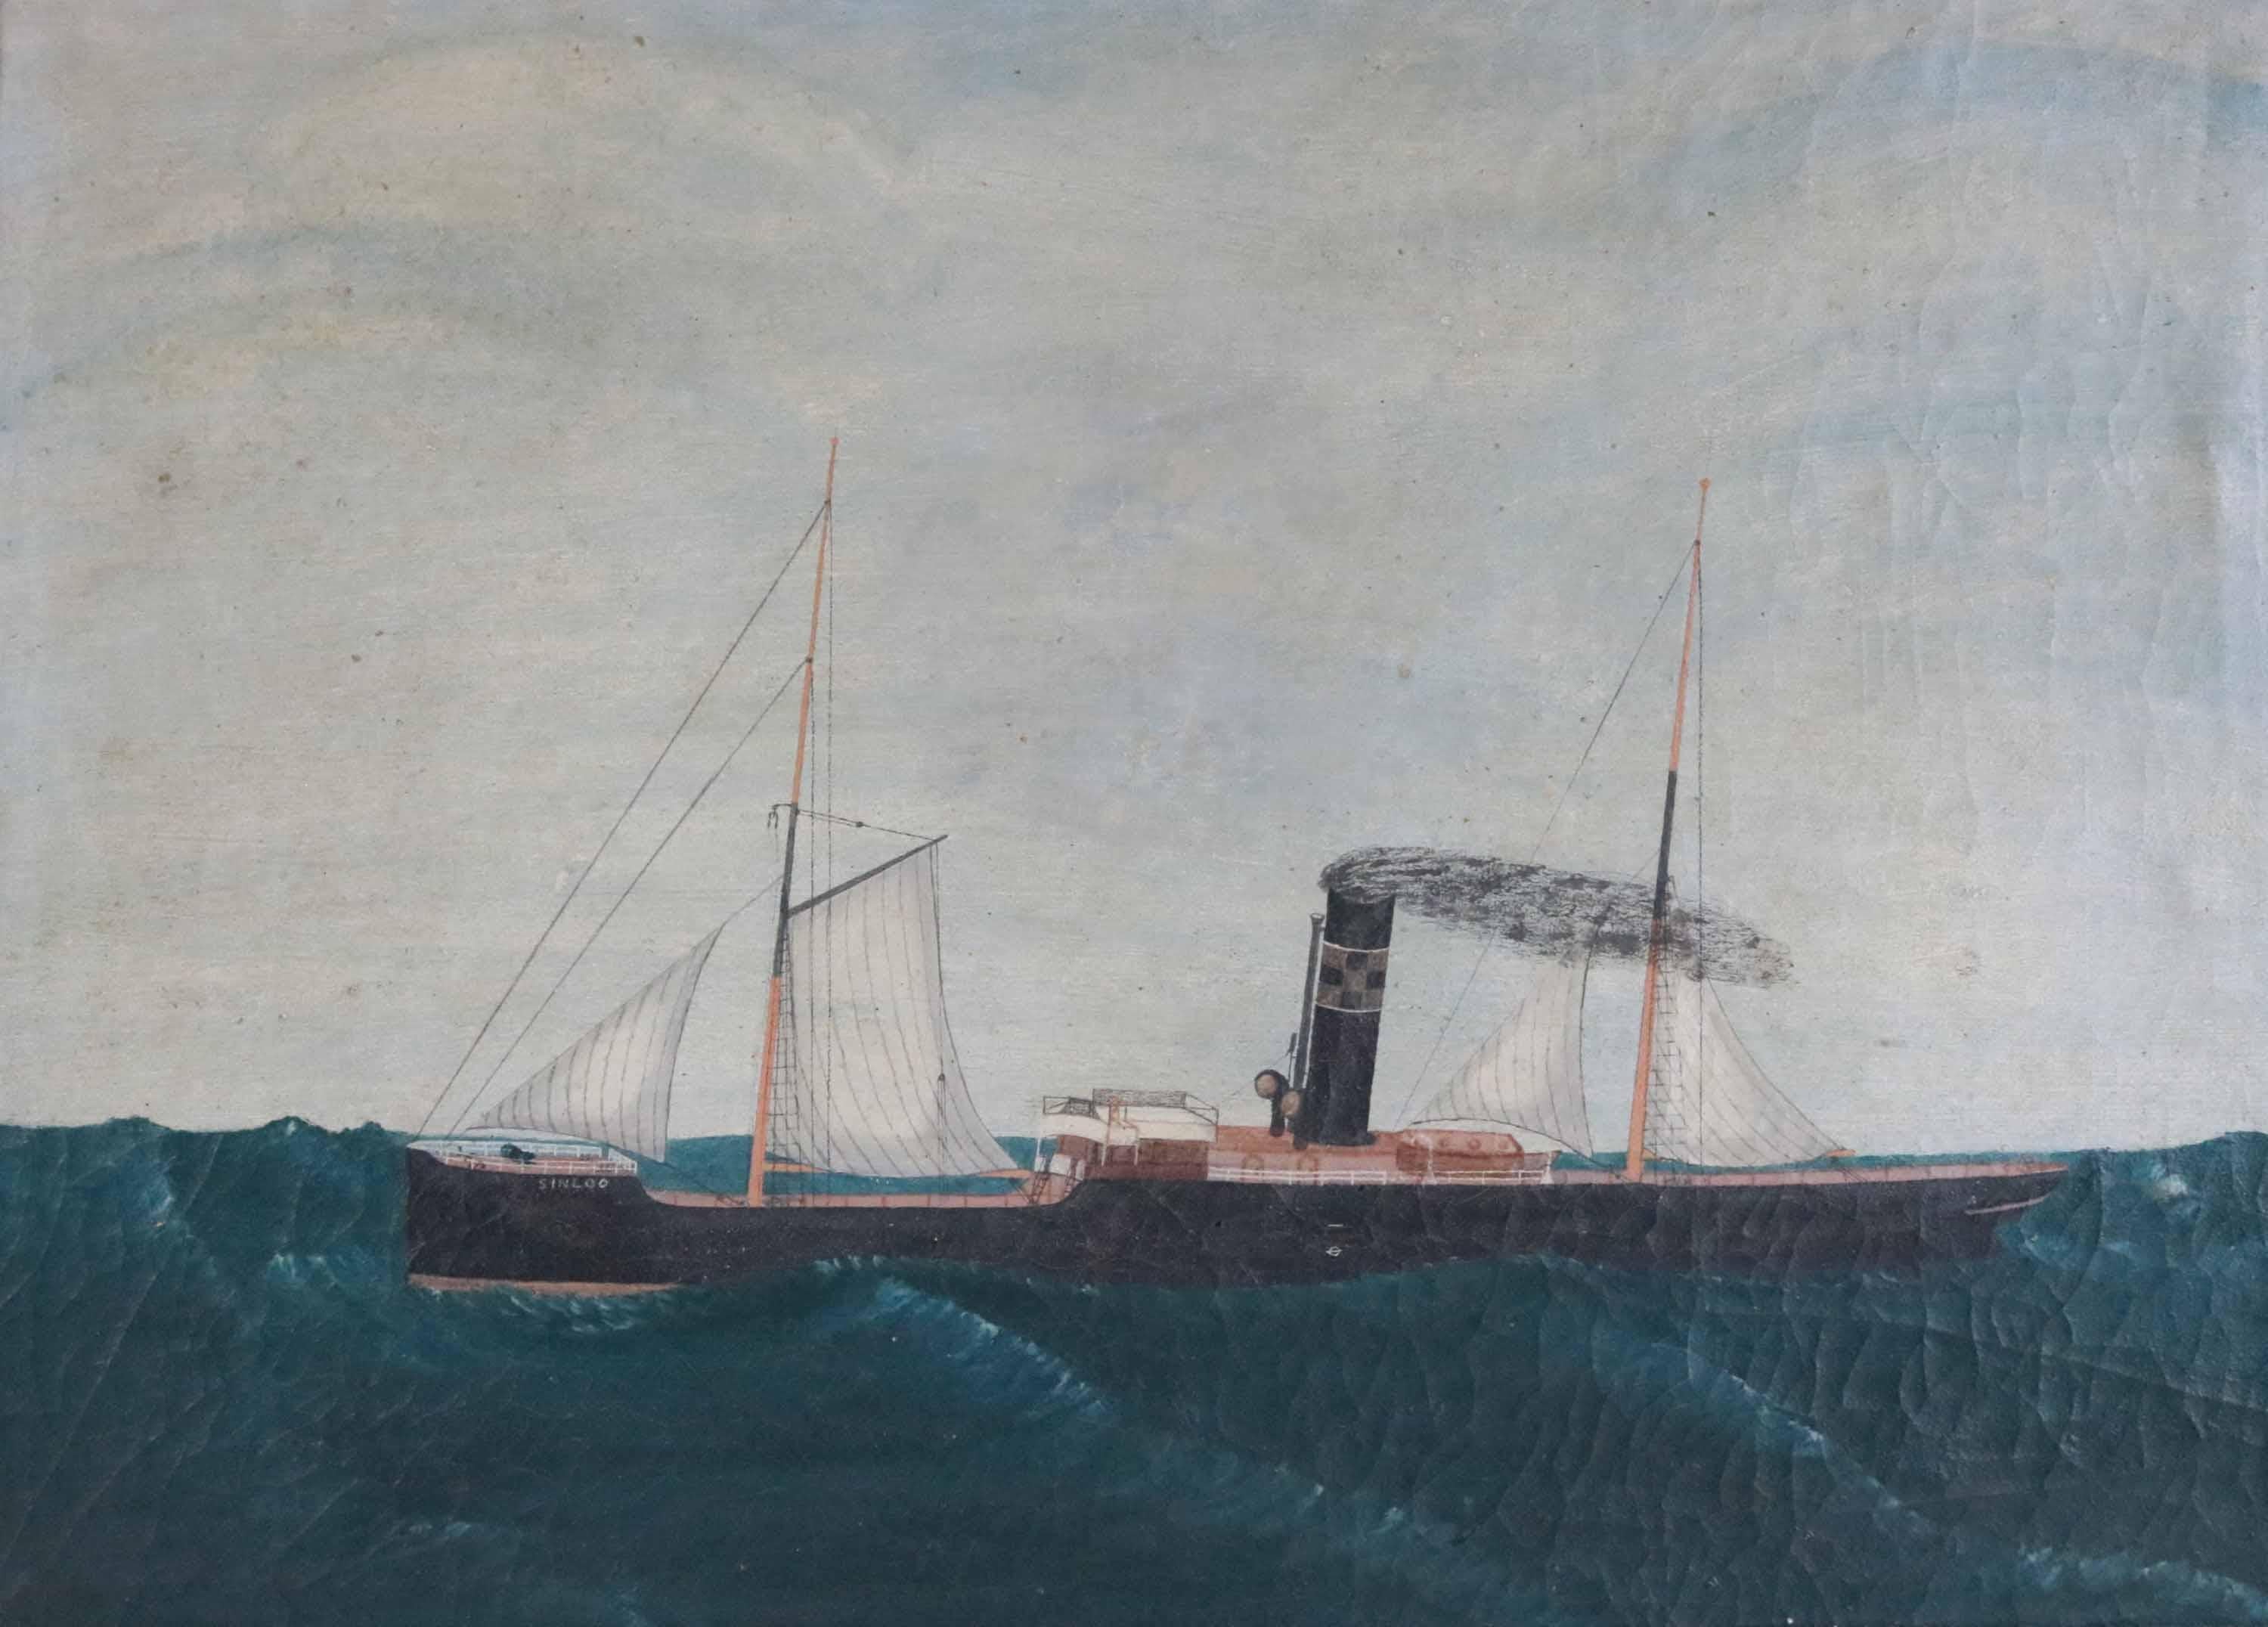 An early to mid-19th century painting of the steamship 